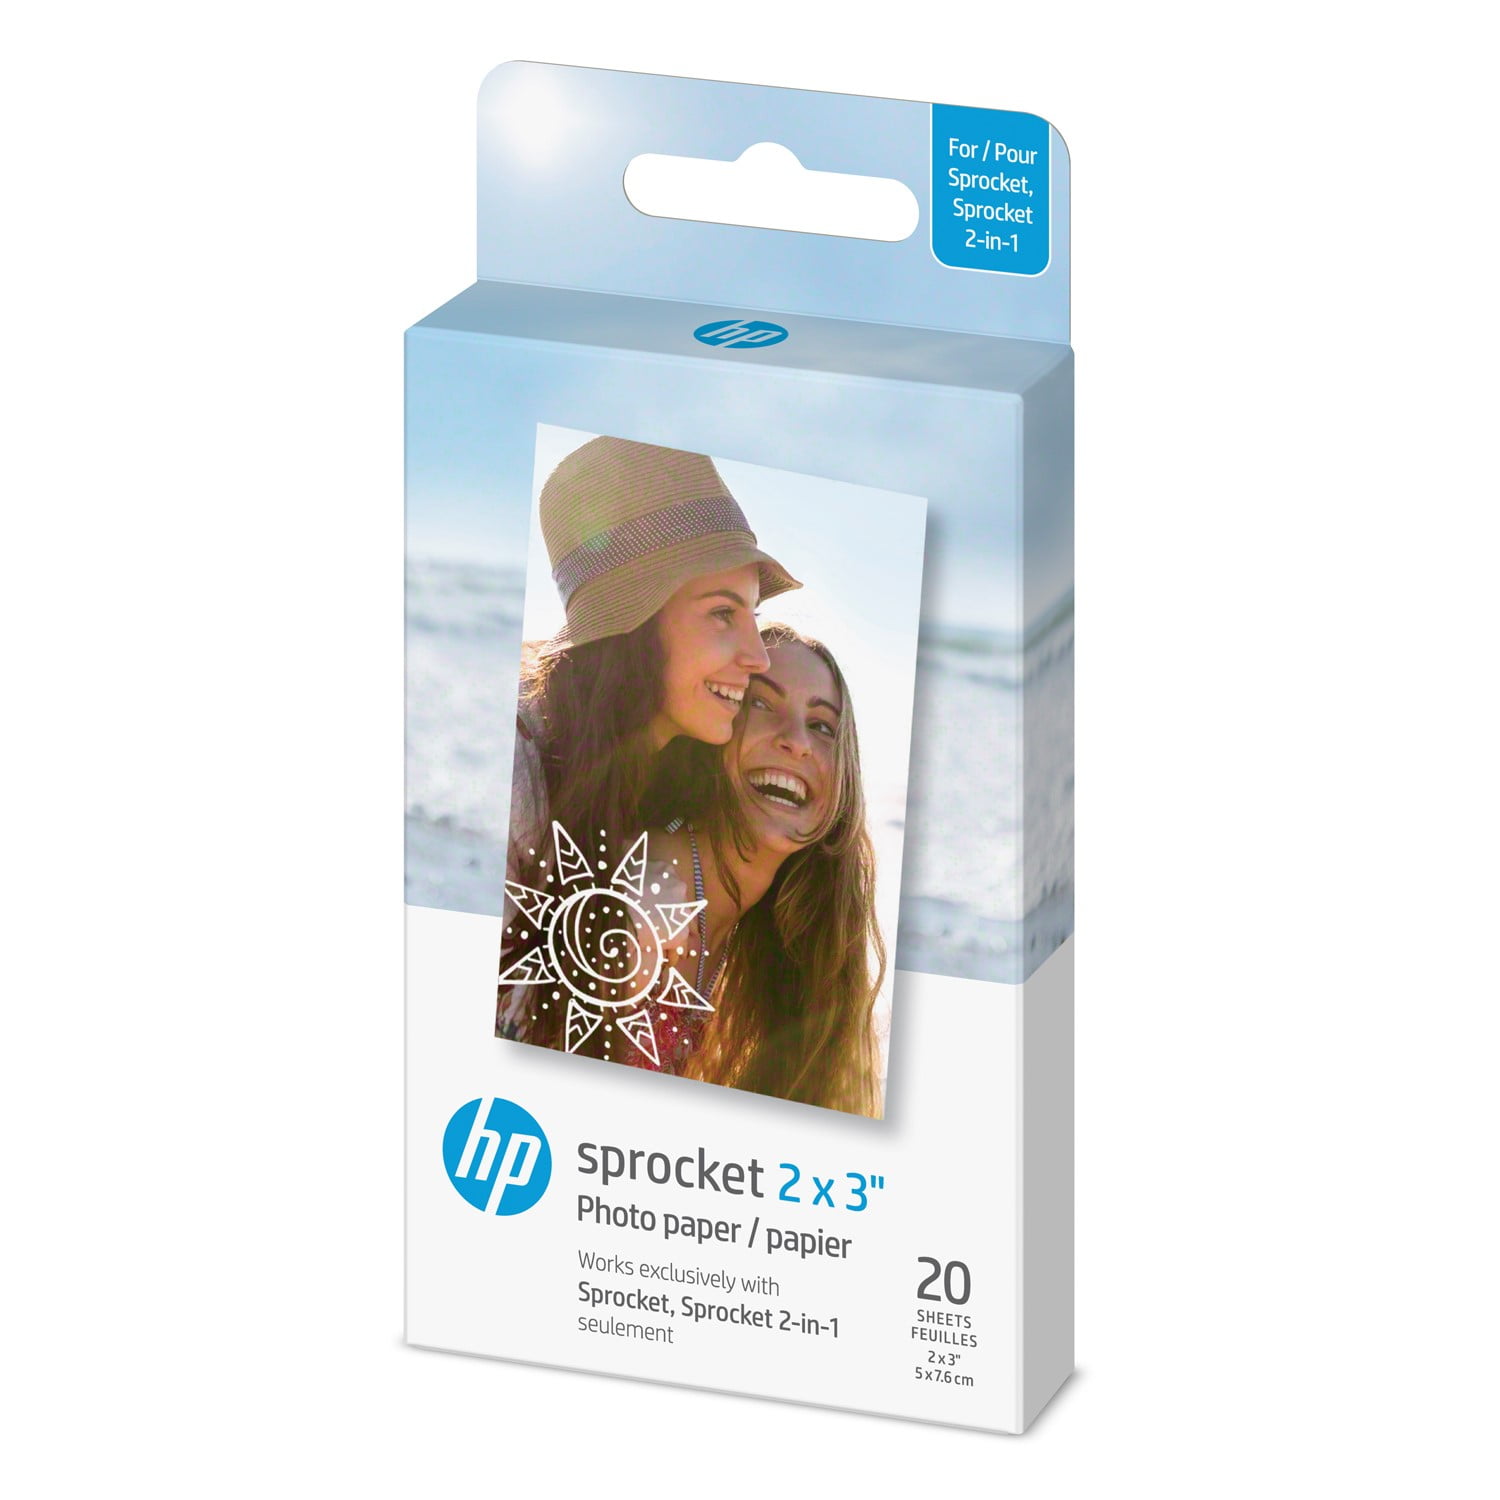 HP Sprocket 2x3 Premium Zink Sticky Back Photo Paper (20 Sheets)  Compatible with HP Sprocket Photo Printers 